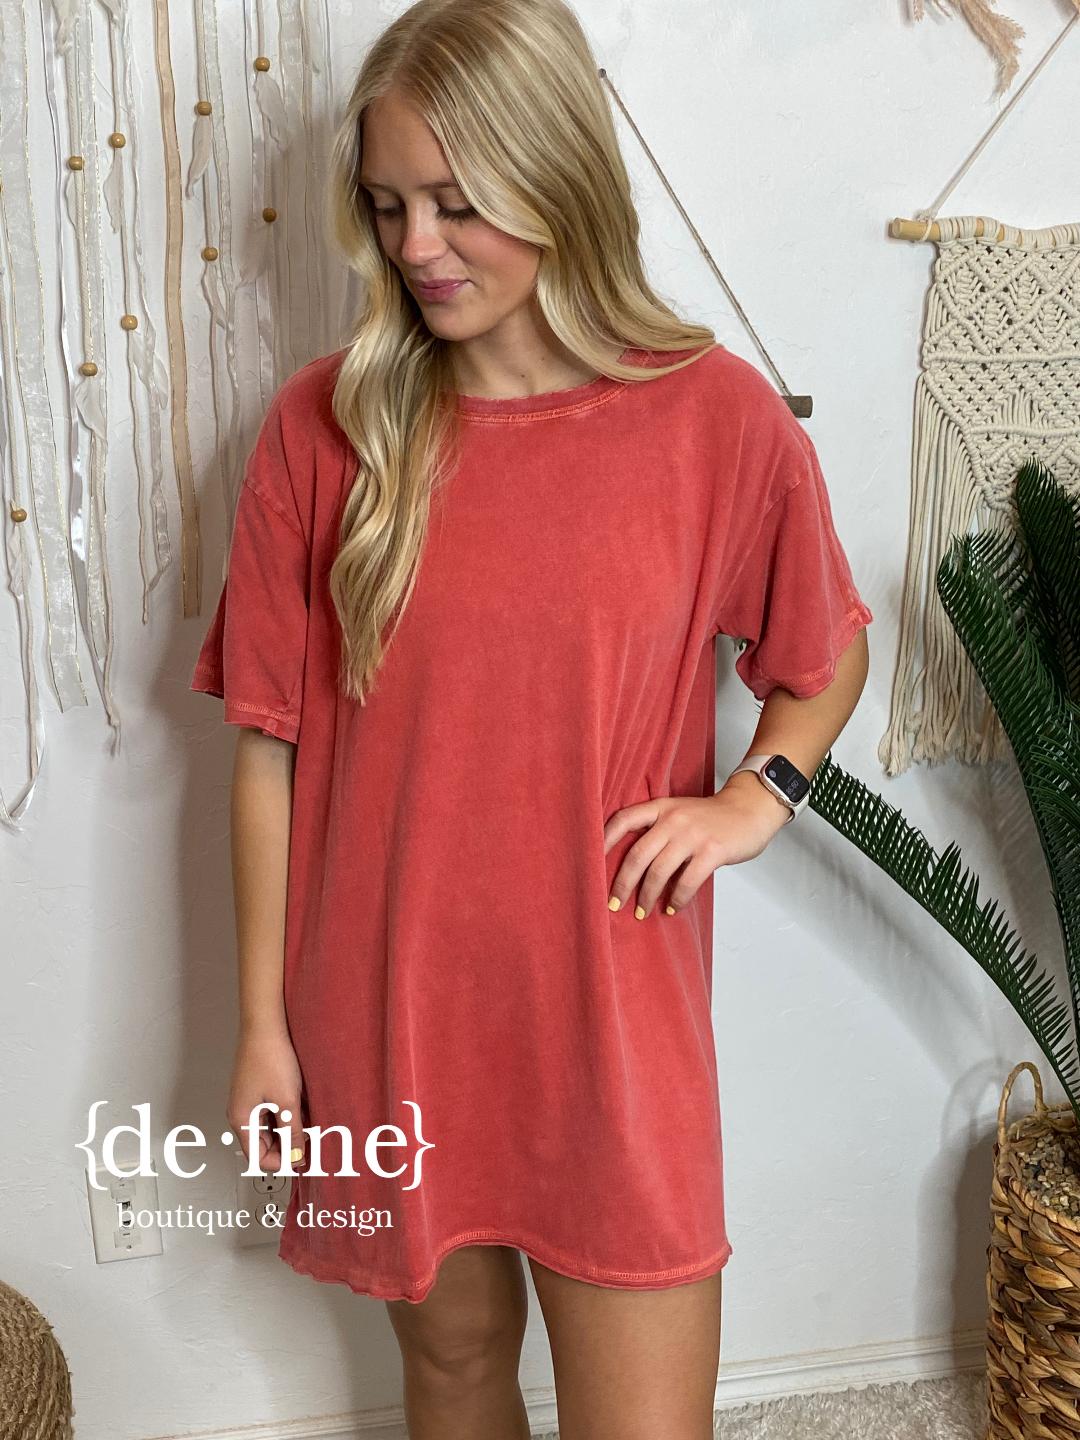 Mineral Wash Dress or Tunic in Jade or Tomato - great for the pool or beach!